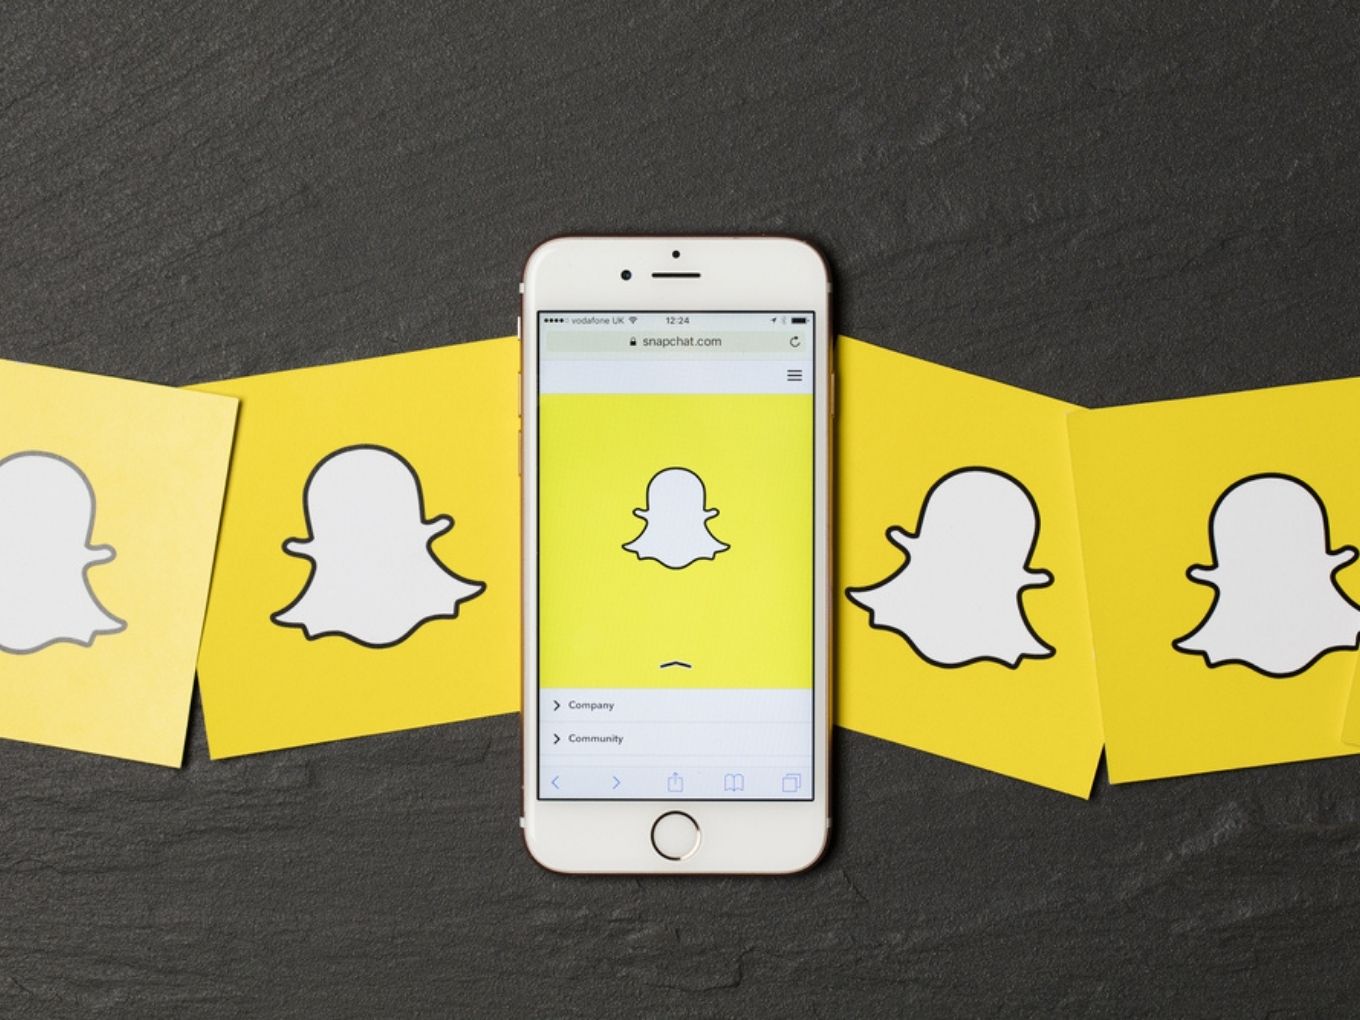 After Doubling Userbase, Snapchat India Records Another 150% Quarterly Growth